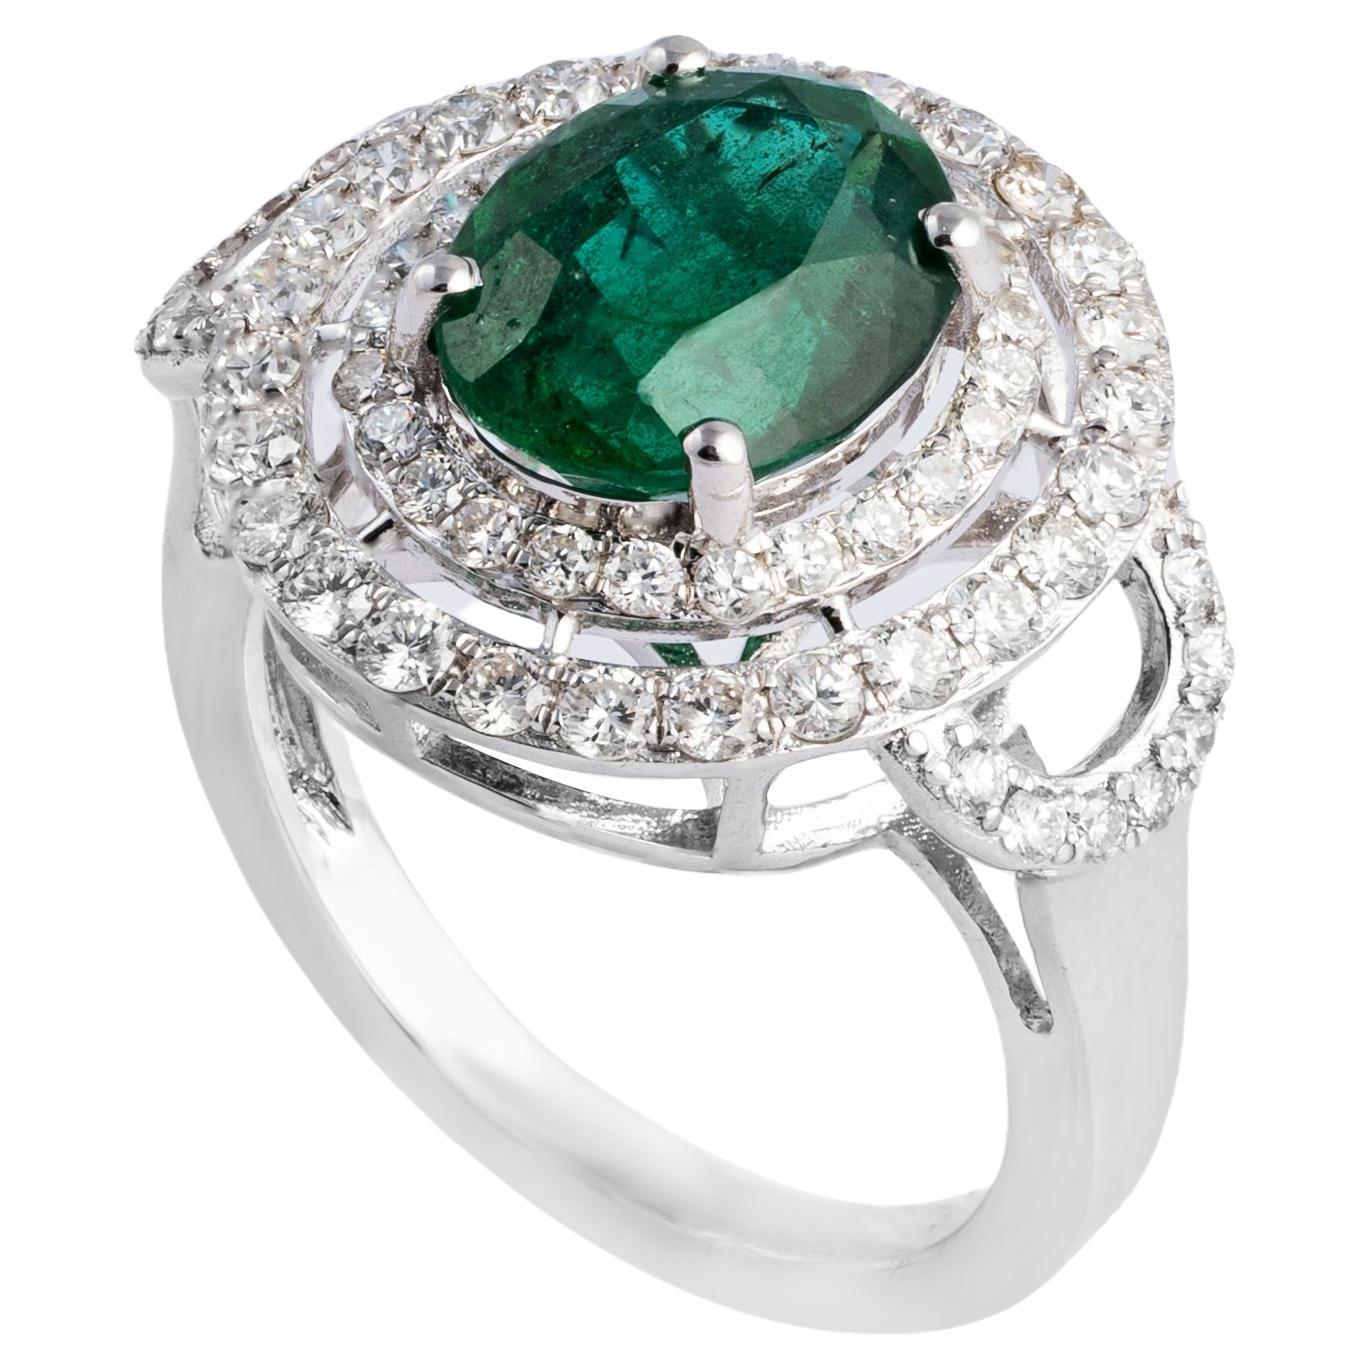 3.36cts Zambian Emerald Ring with 1.01cts Diamonds and 14k Gold For Sale